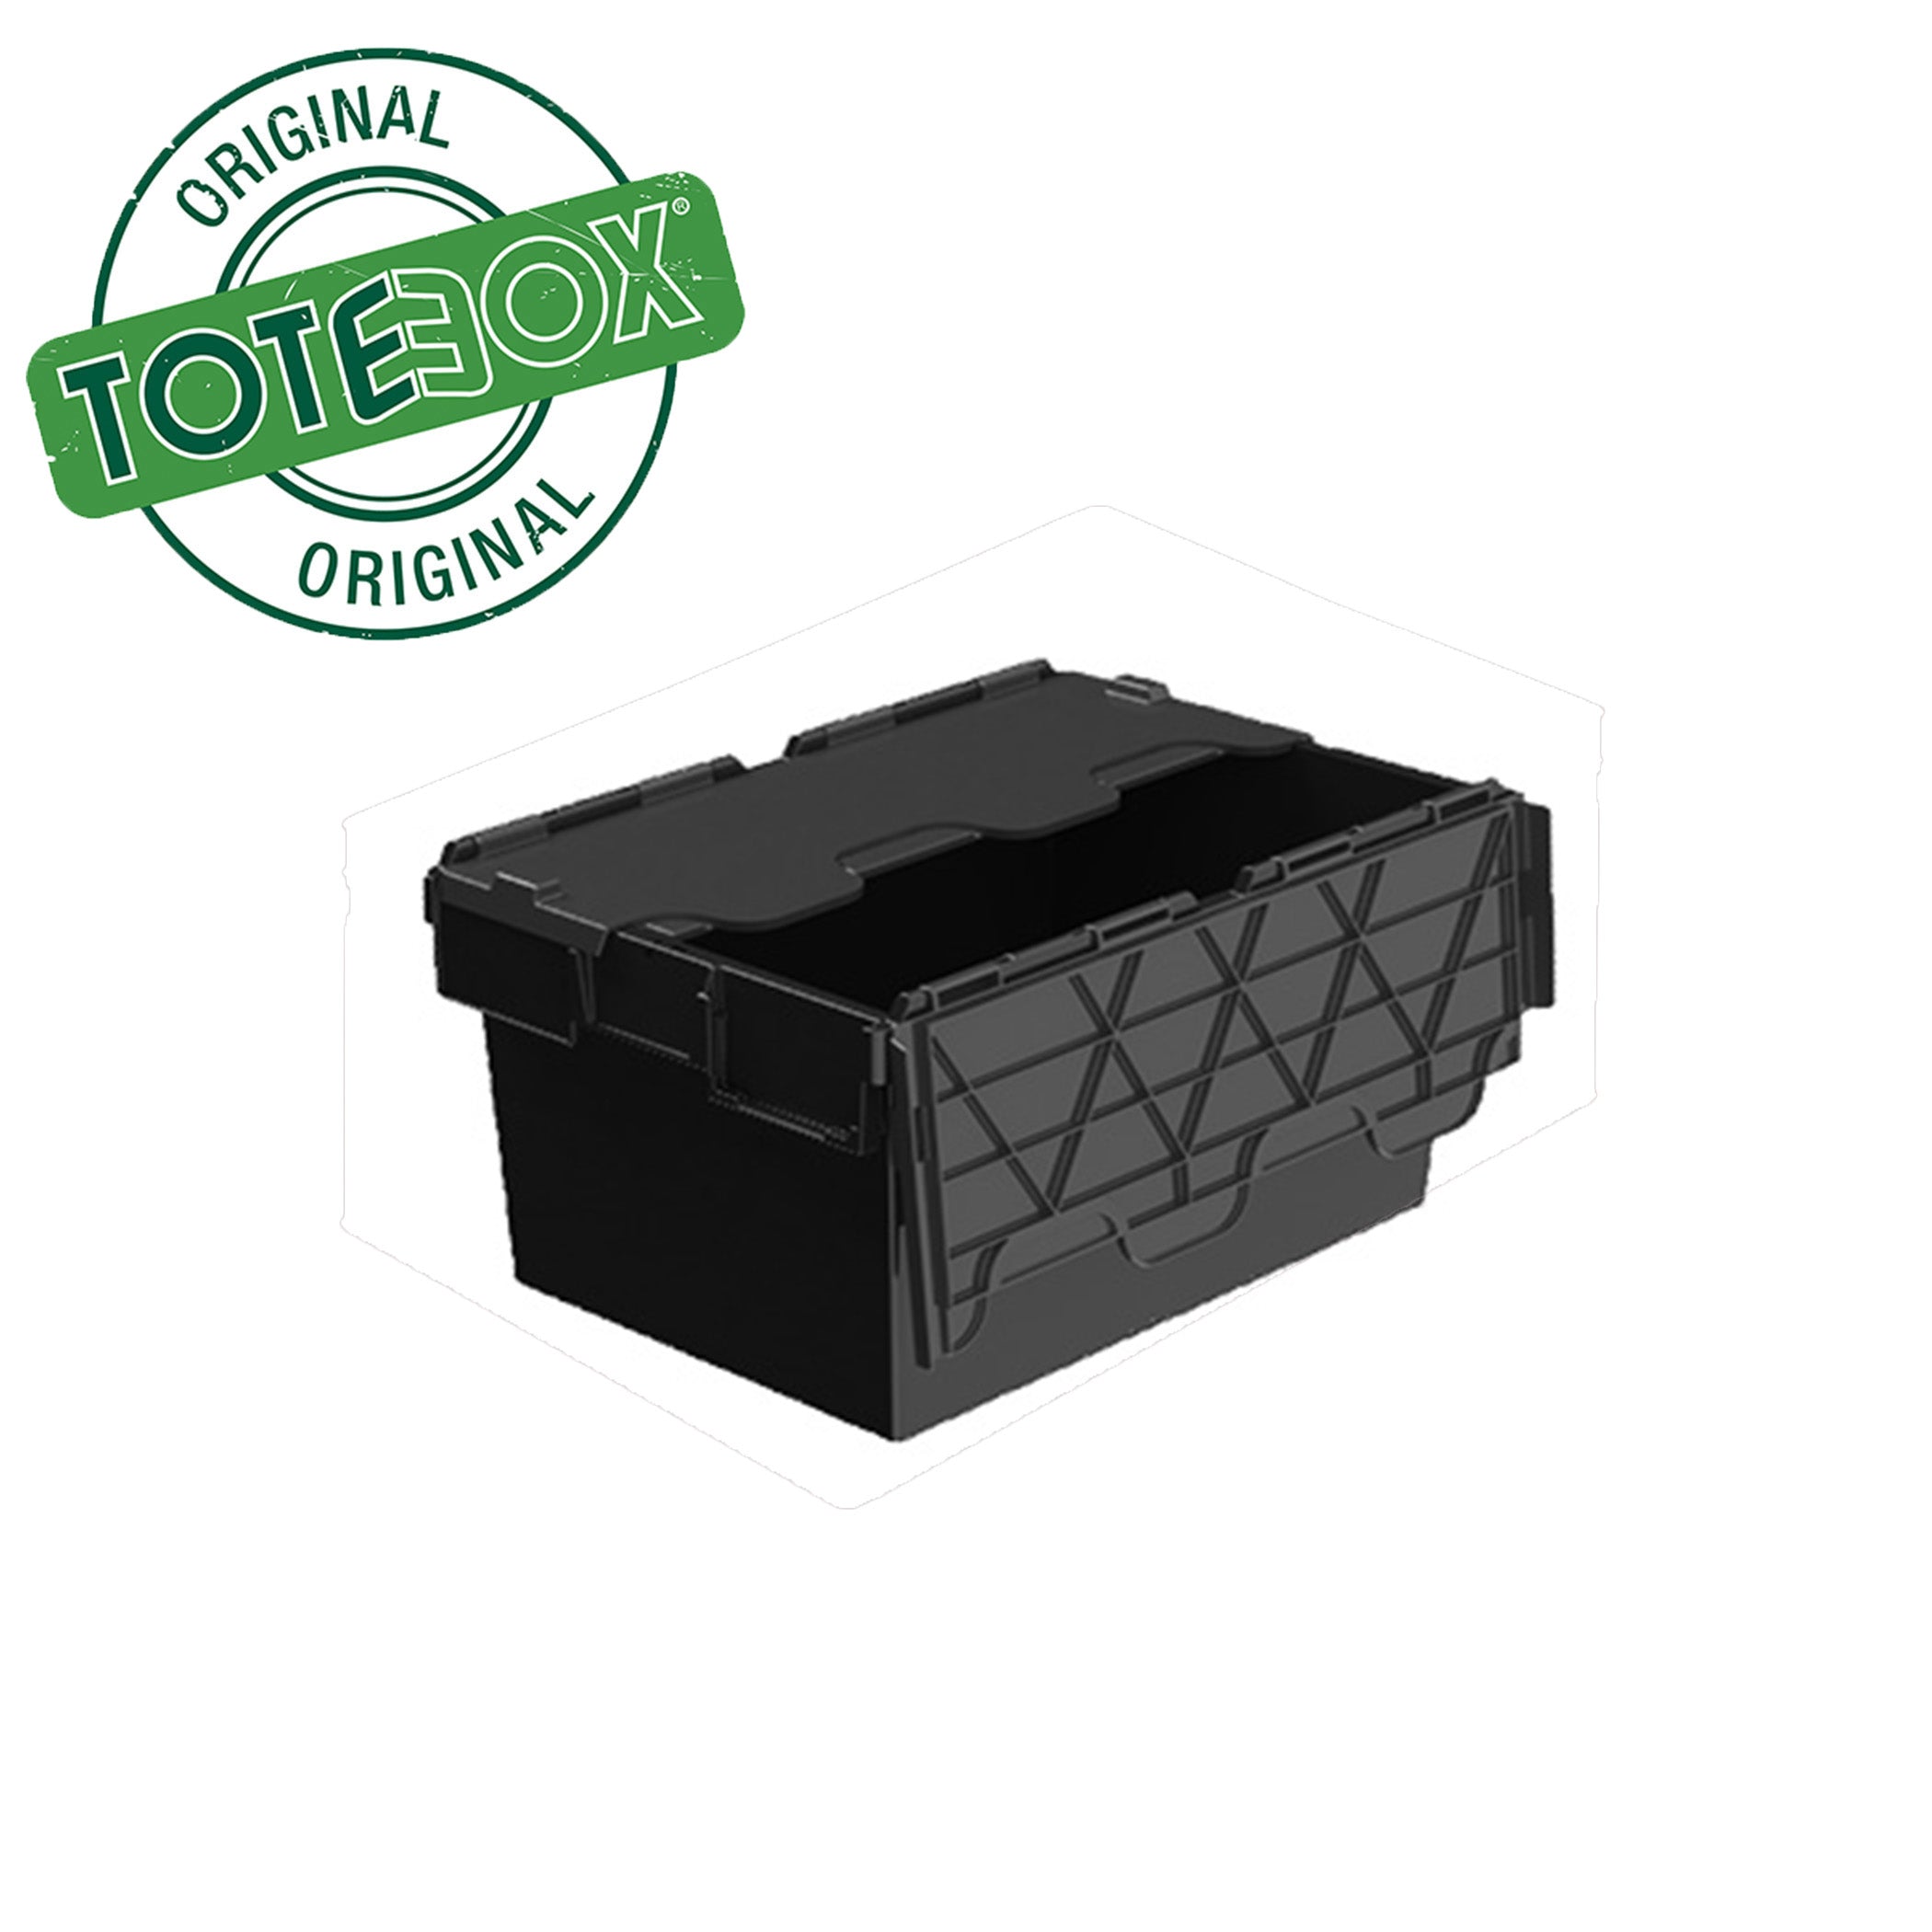 54L Attached Lid Container Original Totebox (600 x 400 x 320h mm)